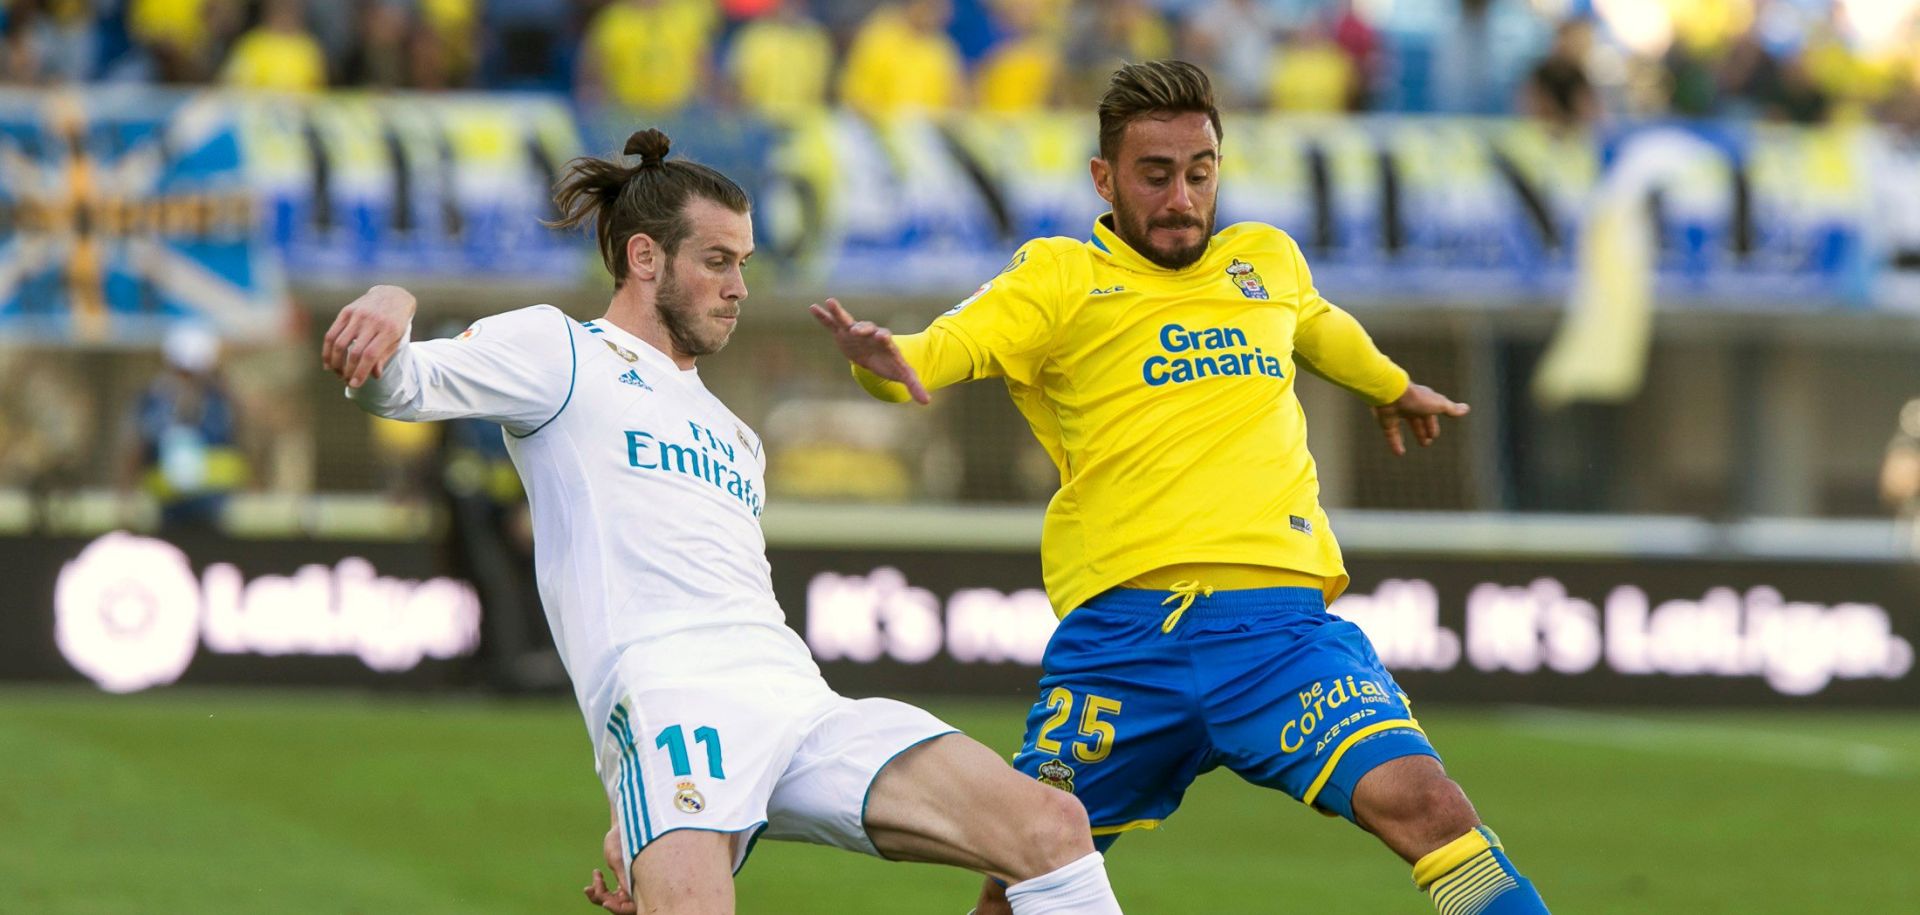 epa06639263 Real Madrid's Gareth Bale (L) vies for the ball with UD Las Palmas' Alberto Aquilani (R)  during the Spanish Primera Division soccer match between UD Las Palmas and Real Madrid played at Gran Canaria stadium, in Las Palmas, Canary Islands, Spain, 31 March 2018.  EPA/QUIQUE CURBELO